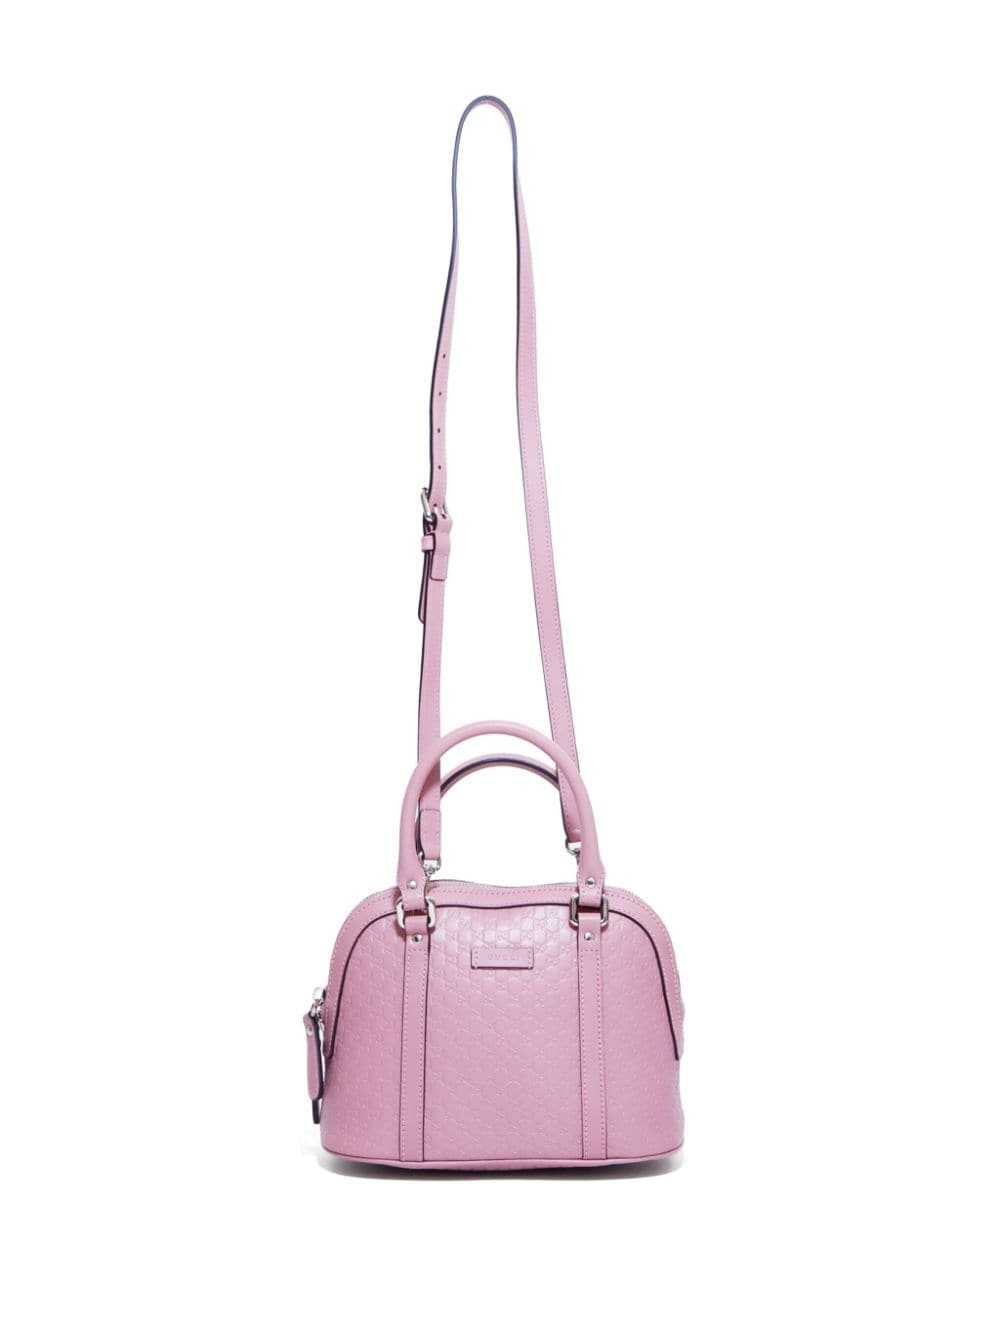 Gucci Pre-Owned Microguccissima two-way bag - Pink - image 5